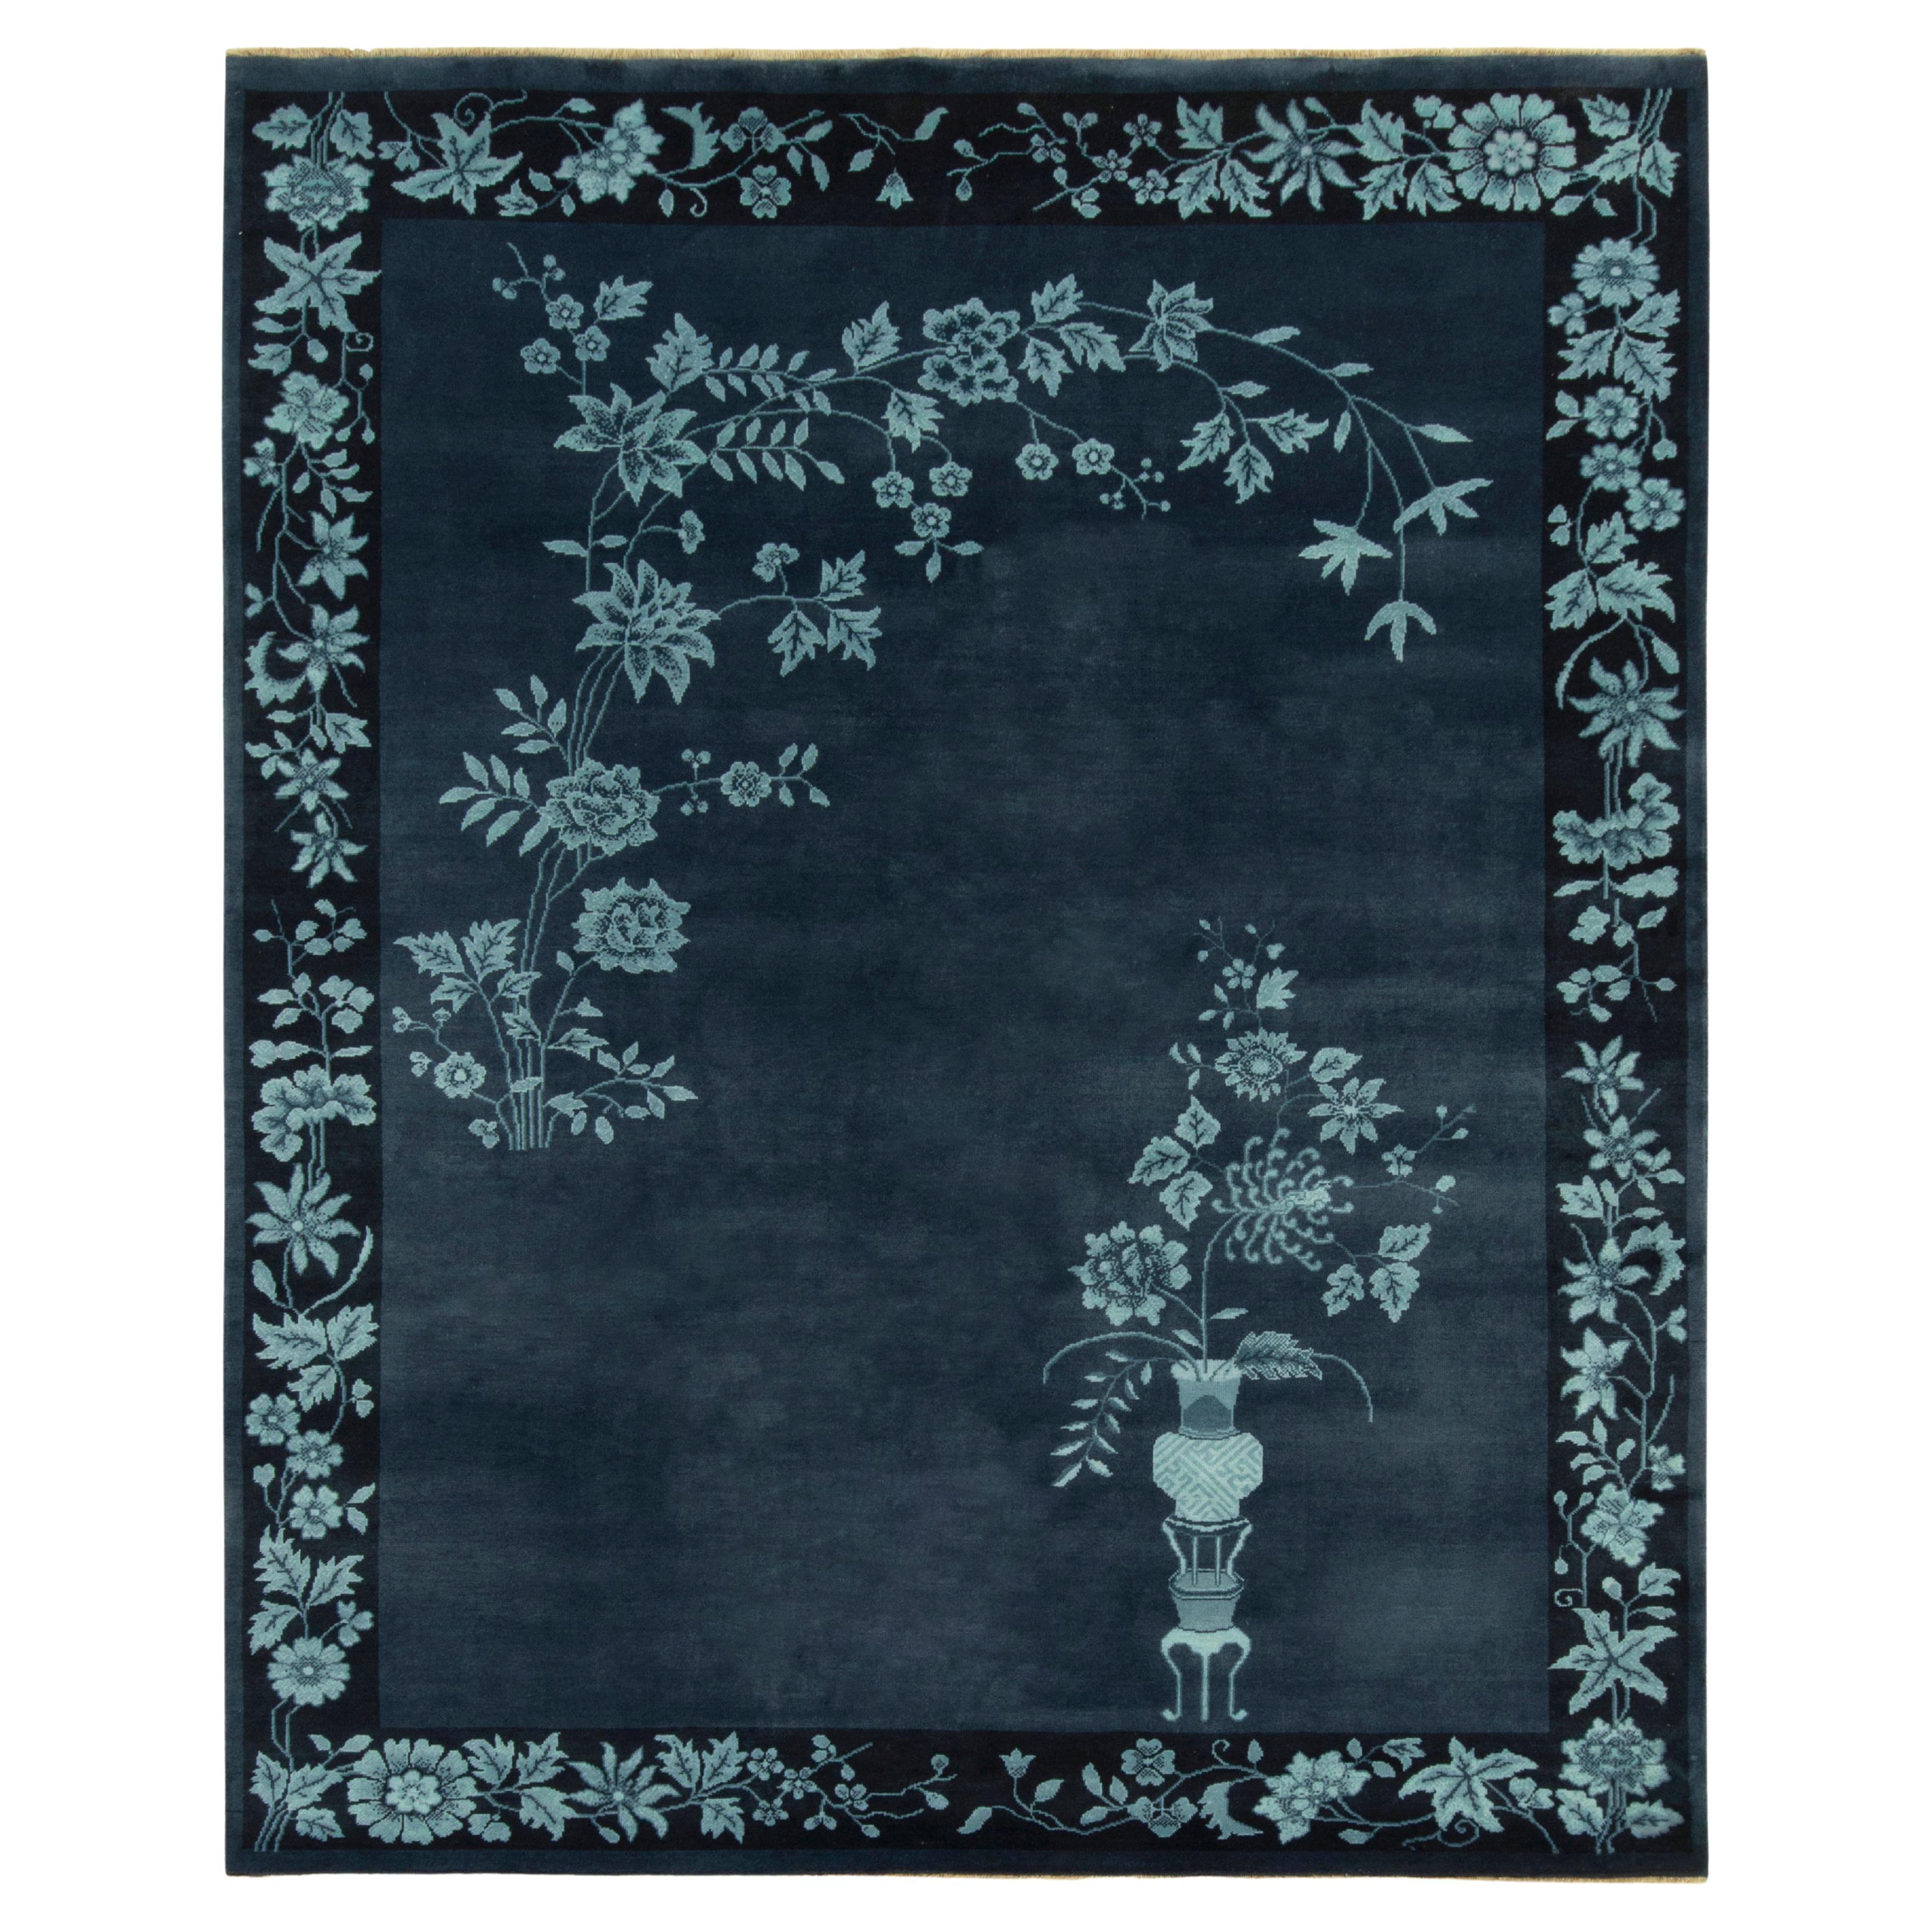 Chinese Deco Style Rug in Blue Floral Patterns by Rug & Kilim